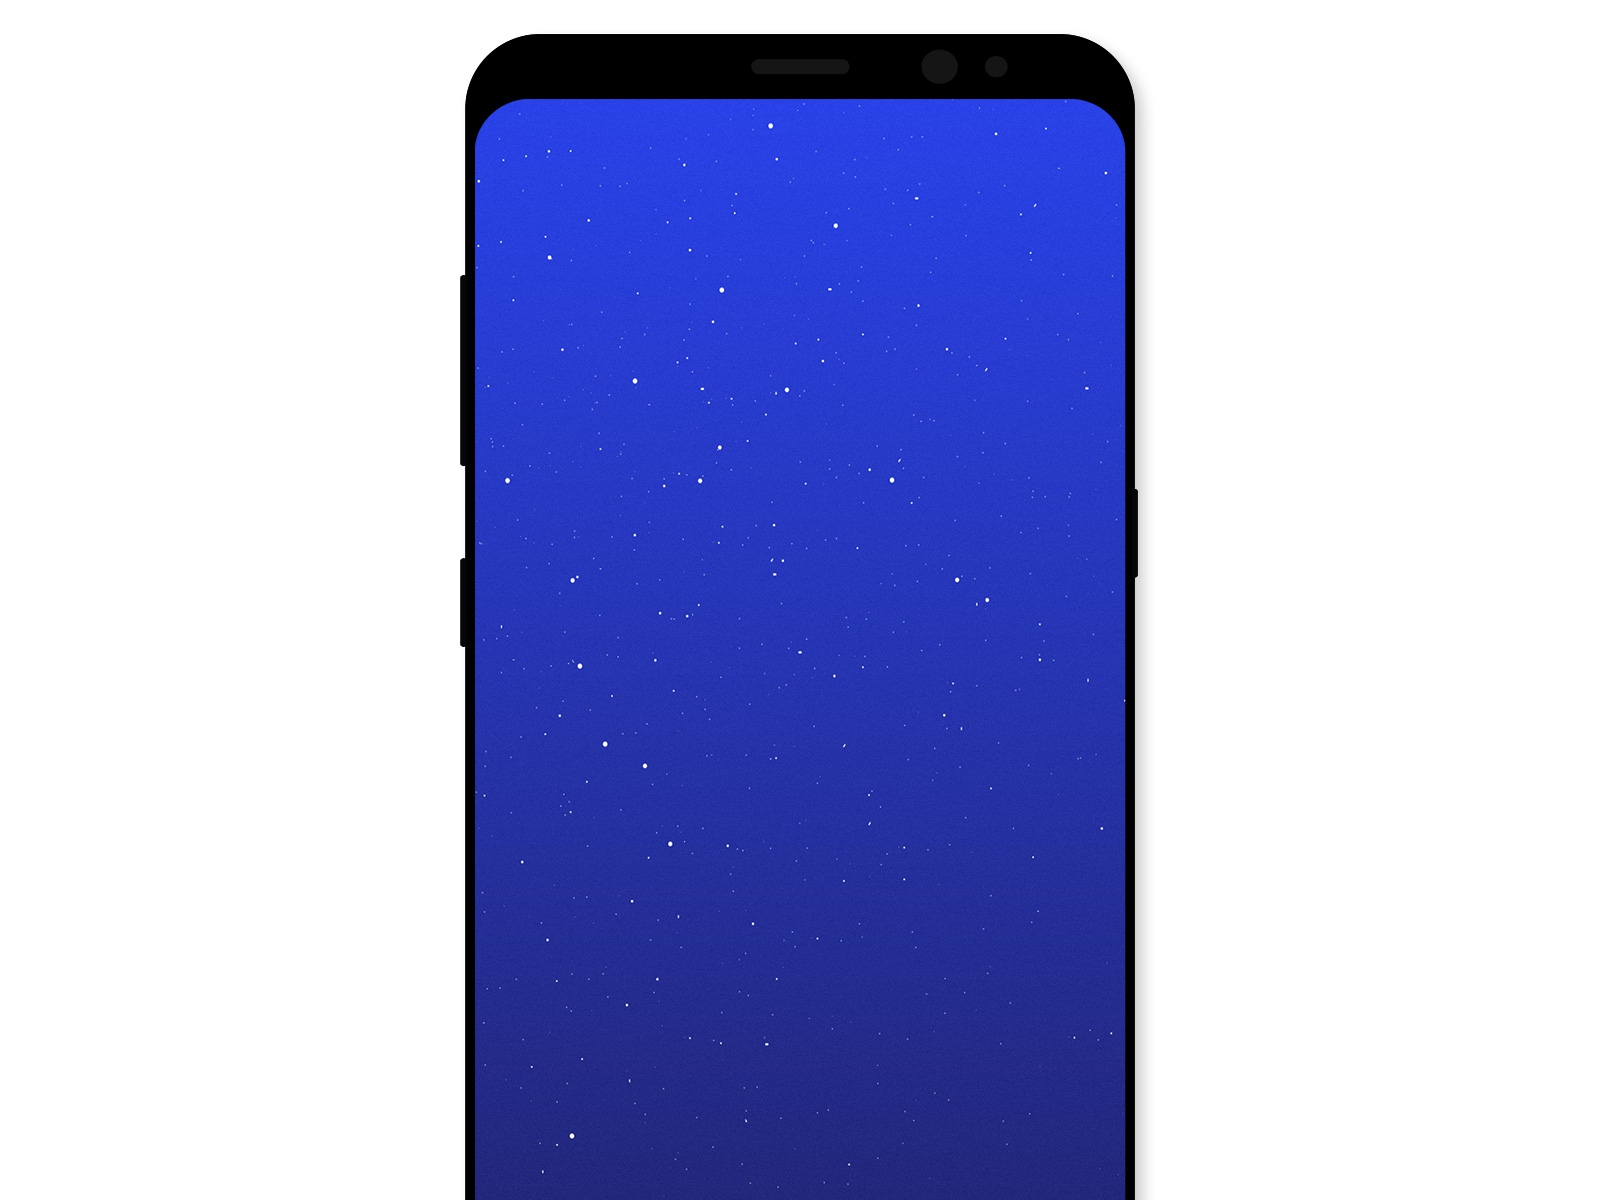 Galaxy S8 Flat Mockup for Figma and Adobe XD No 1